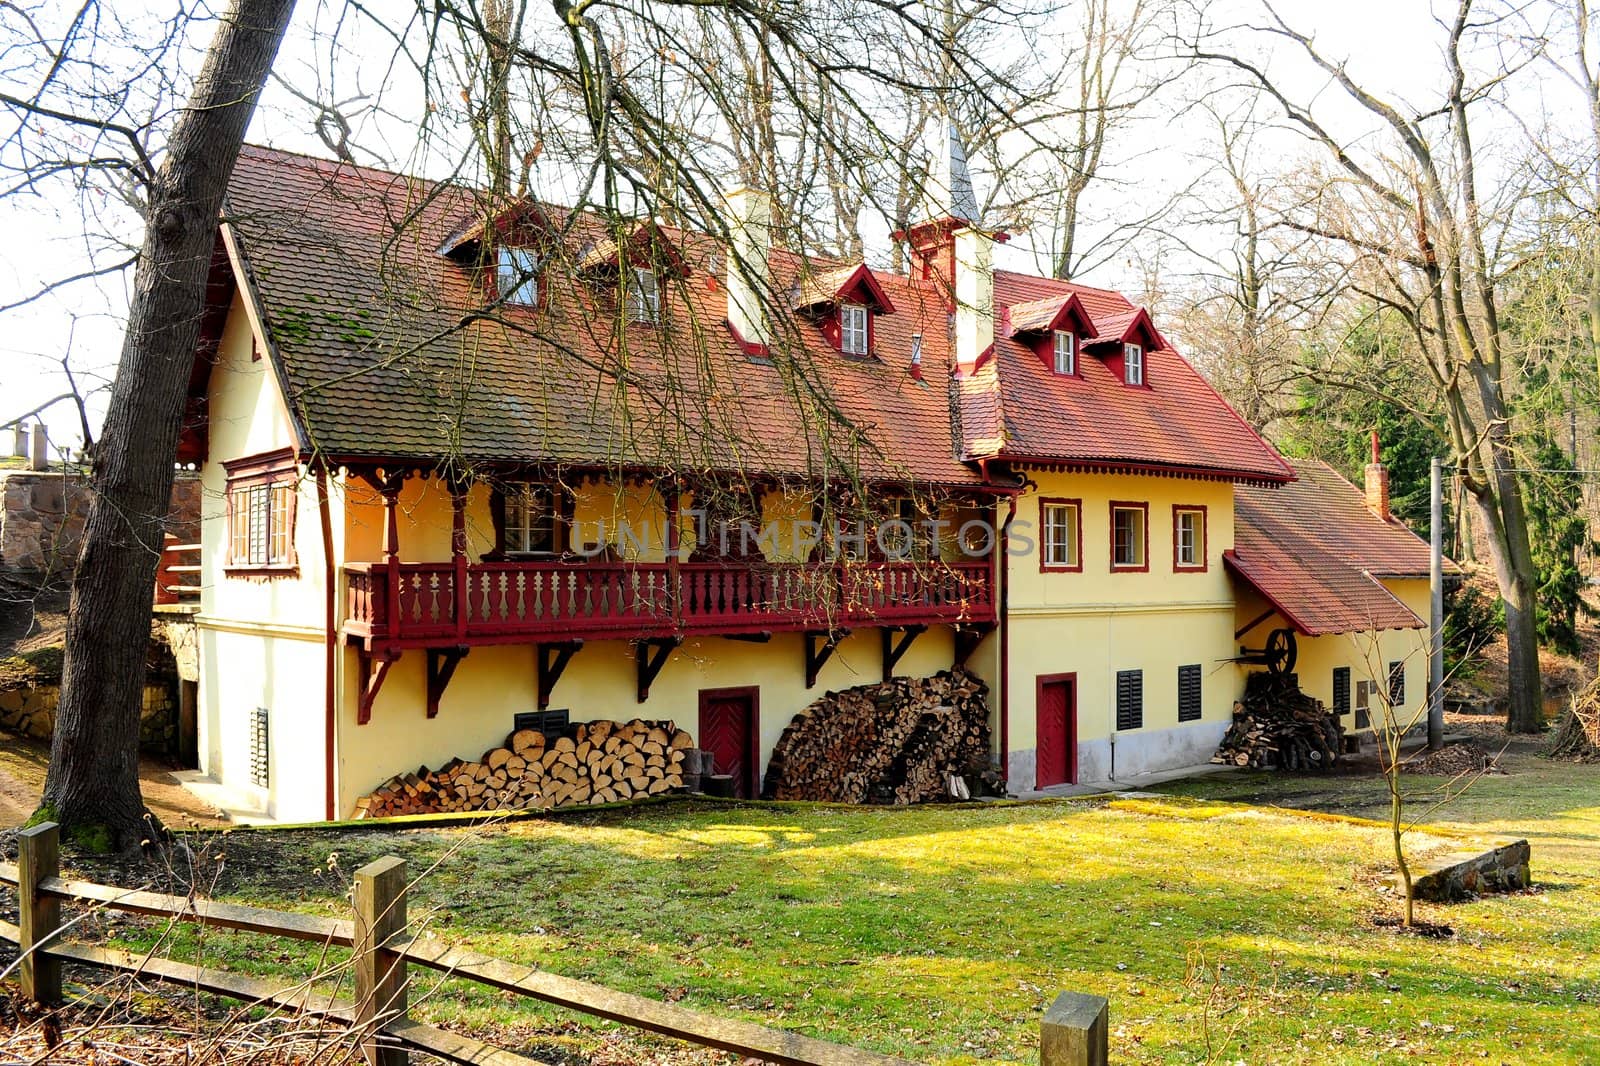 Typical country estate on the territory of Konopiste chateau near Prague, Czech Republic